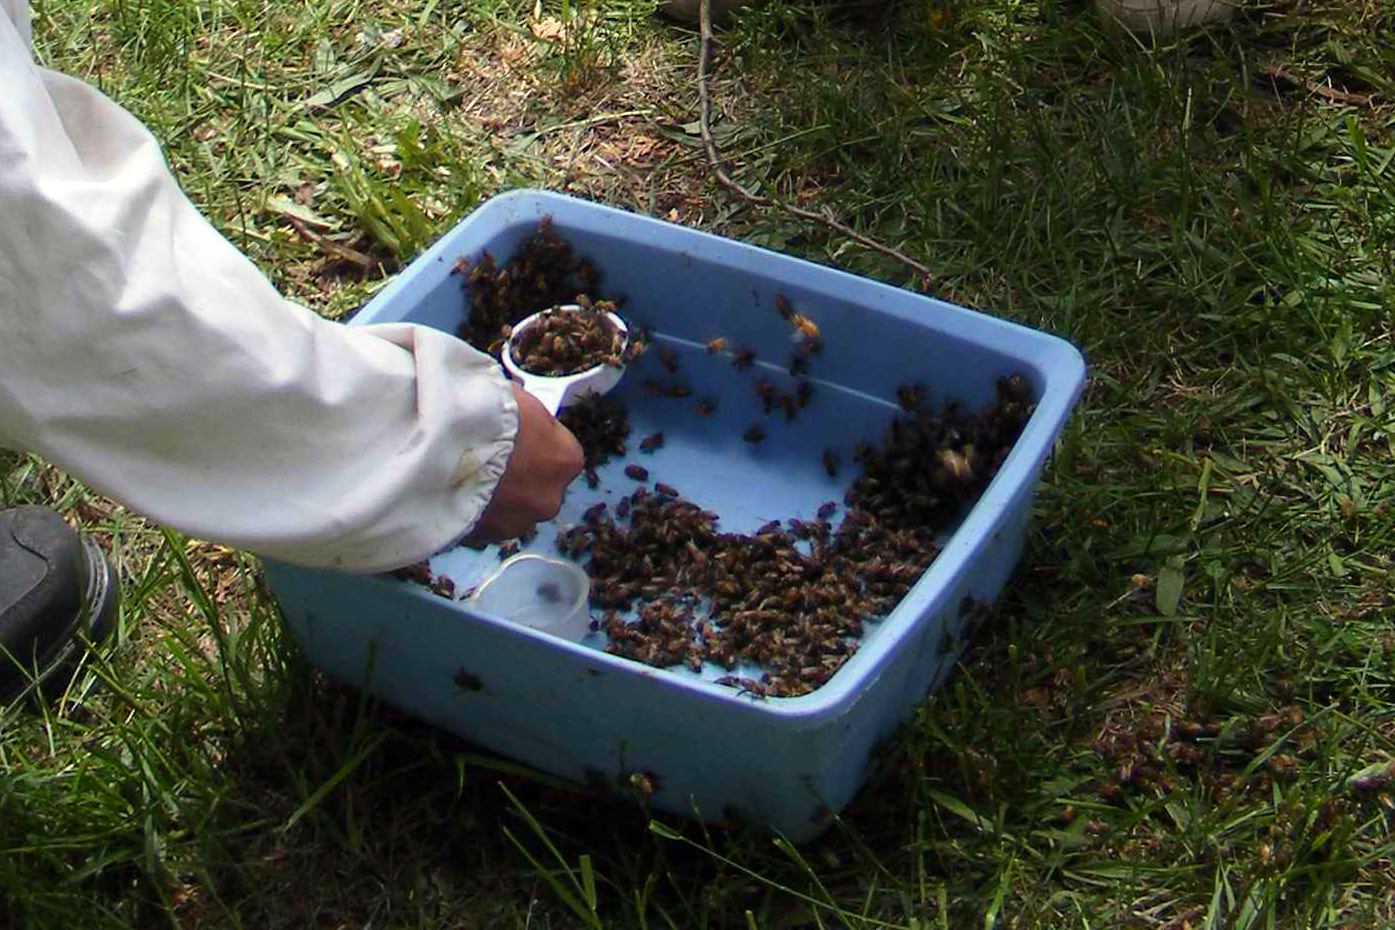 Scooping bees from a collection pan